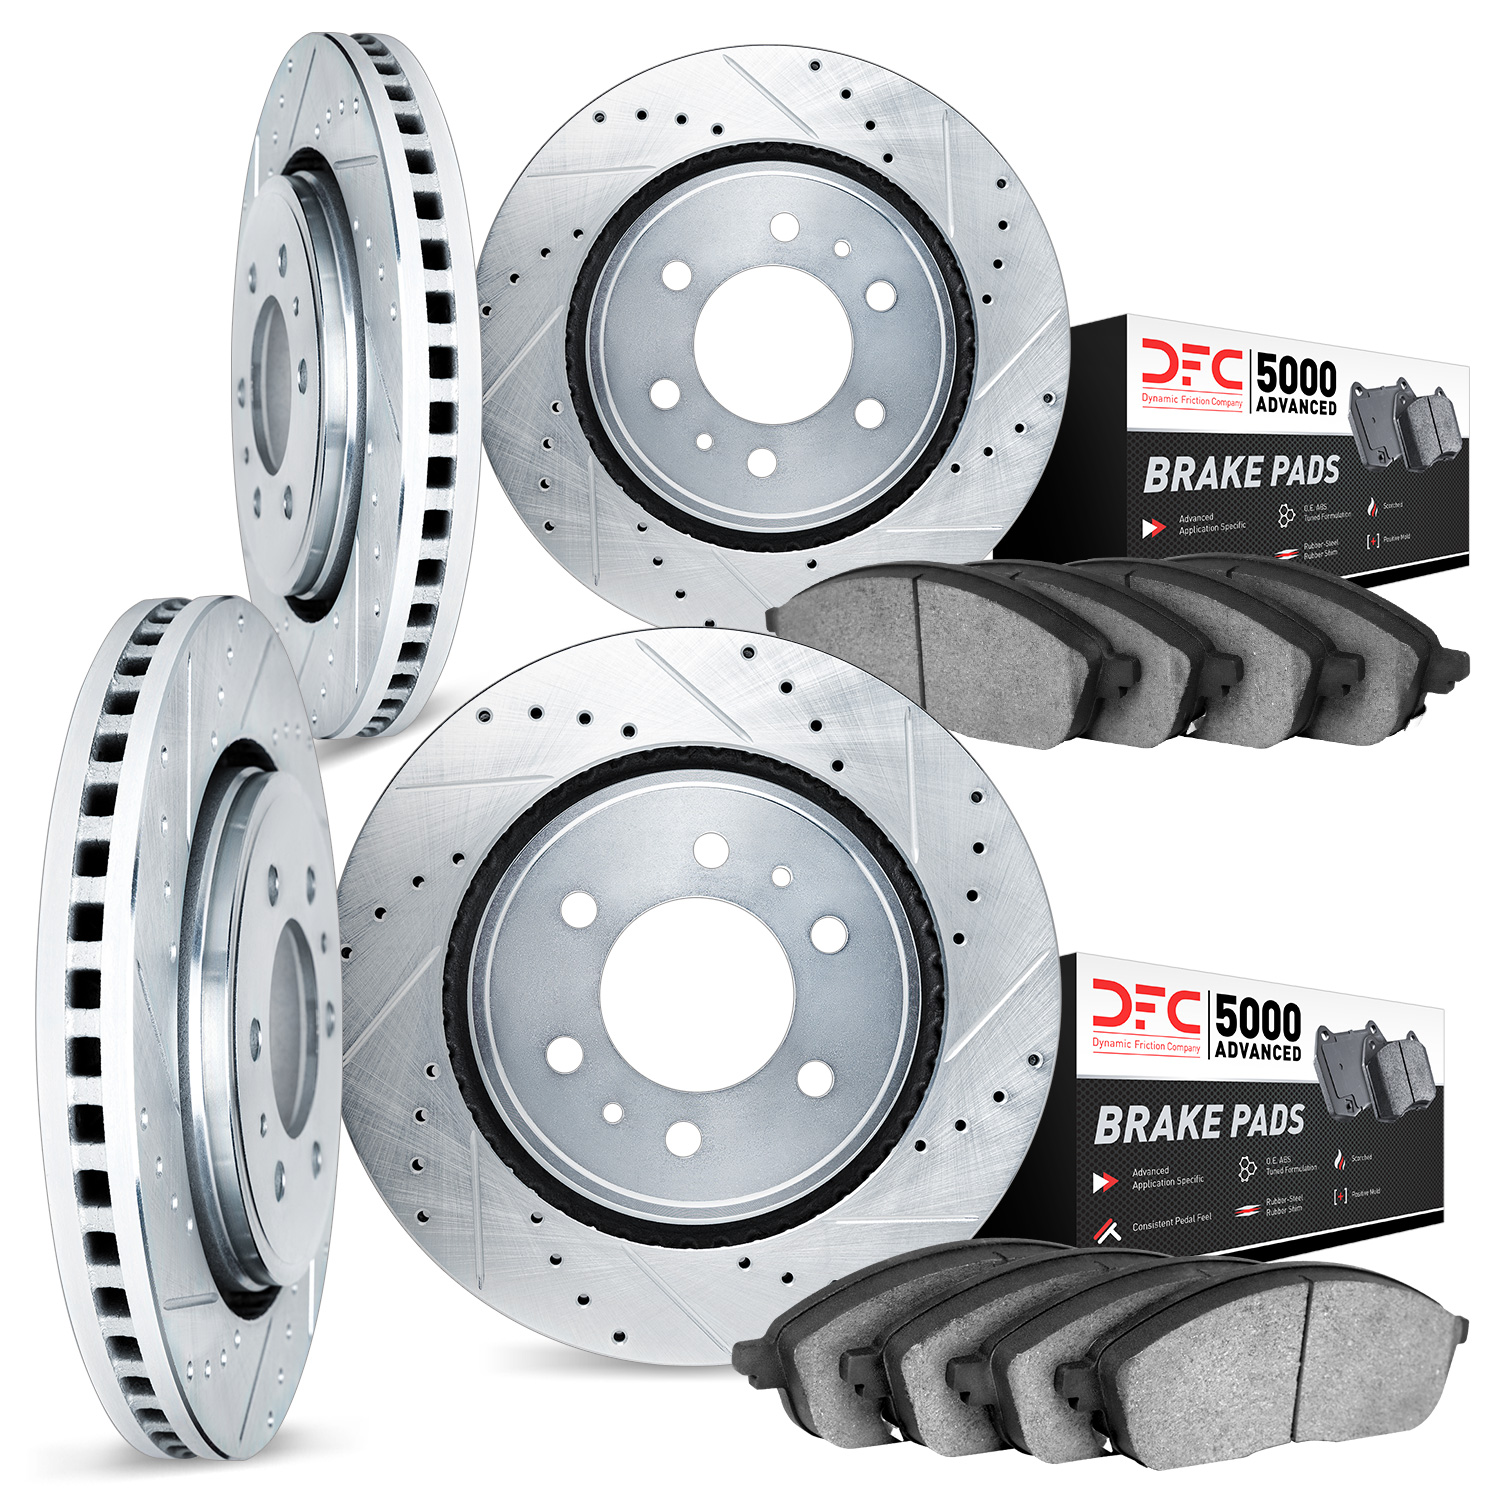 7504-40242 Drilled/Slotted Brake Rotors w/5000 Advanced Brake Pads Kit [Silver], 2003-2003 Mopar, Position: Front and Rear